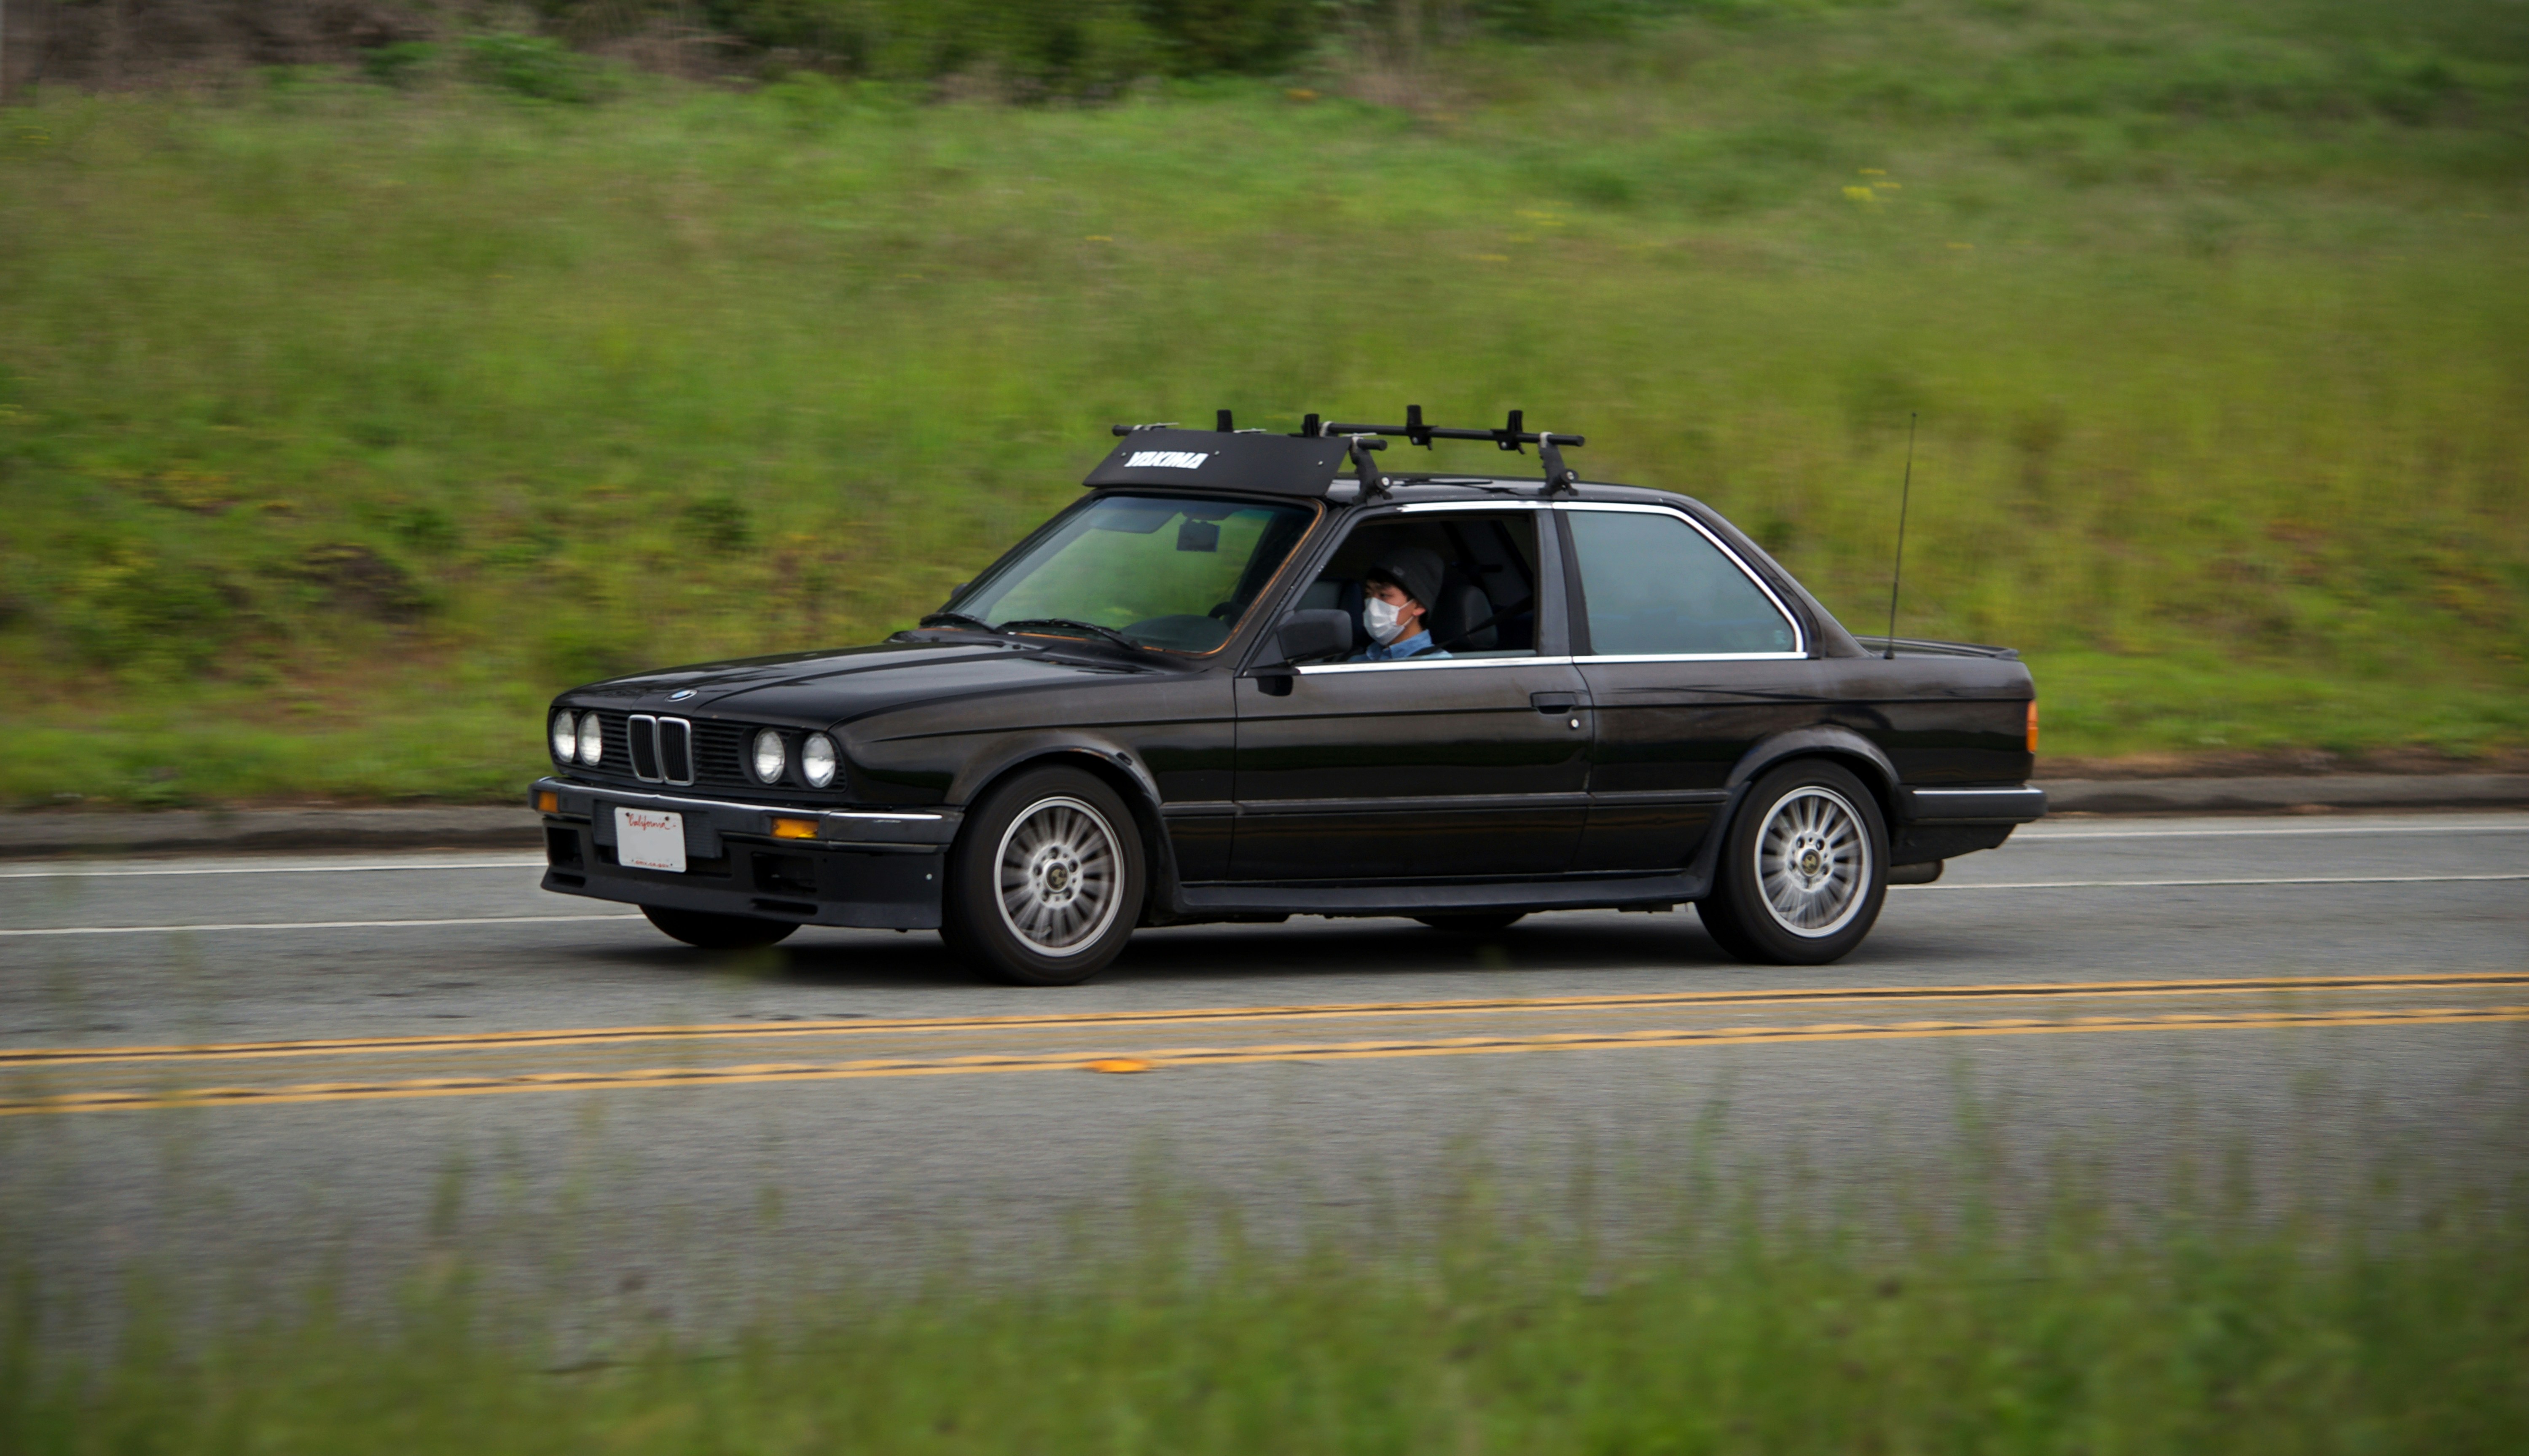 A black BMW driving on the highway.